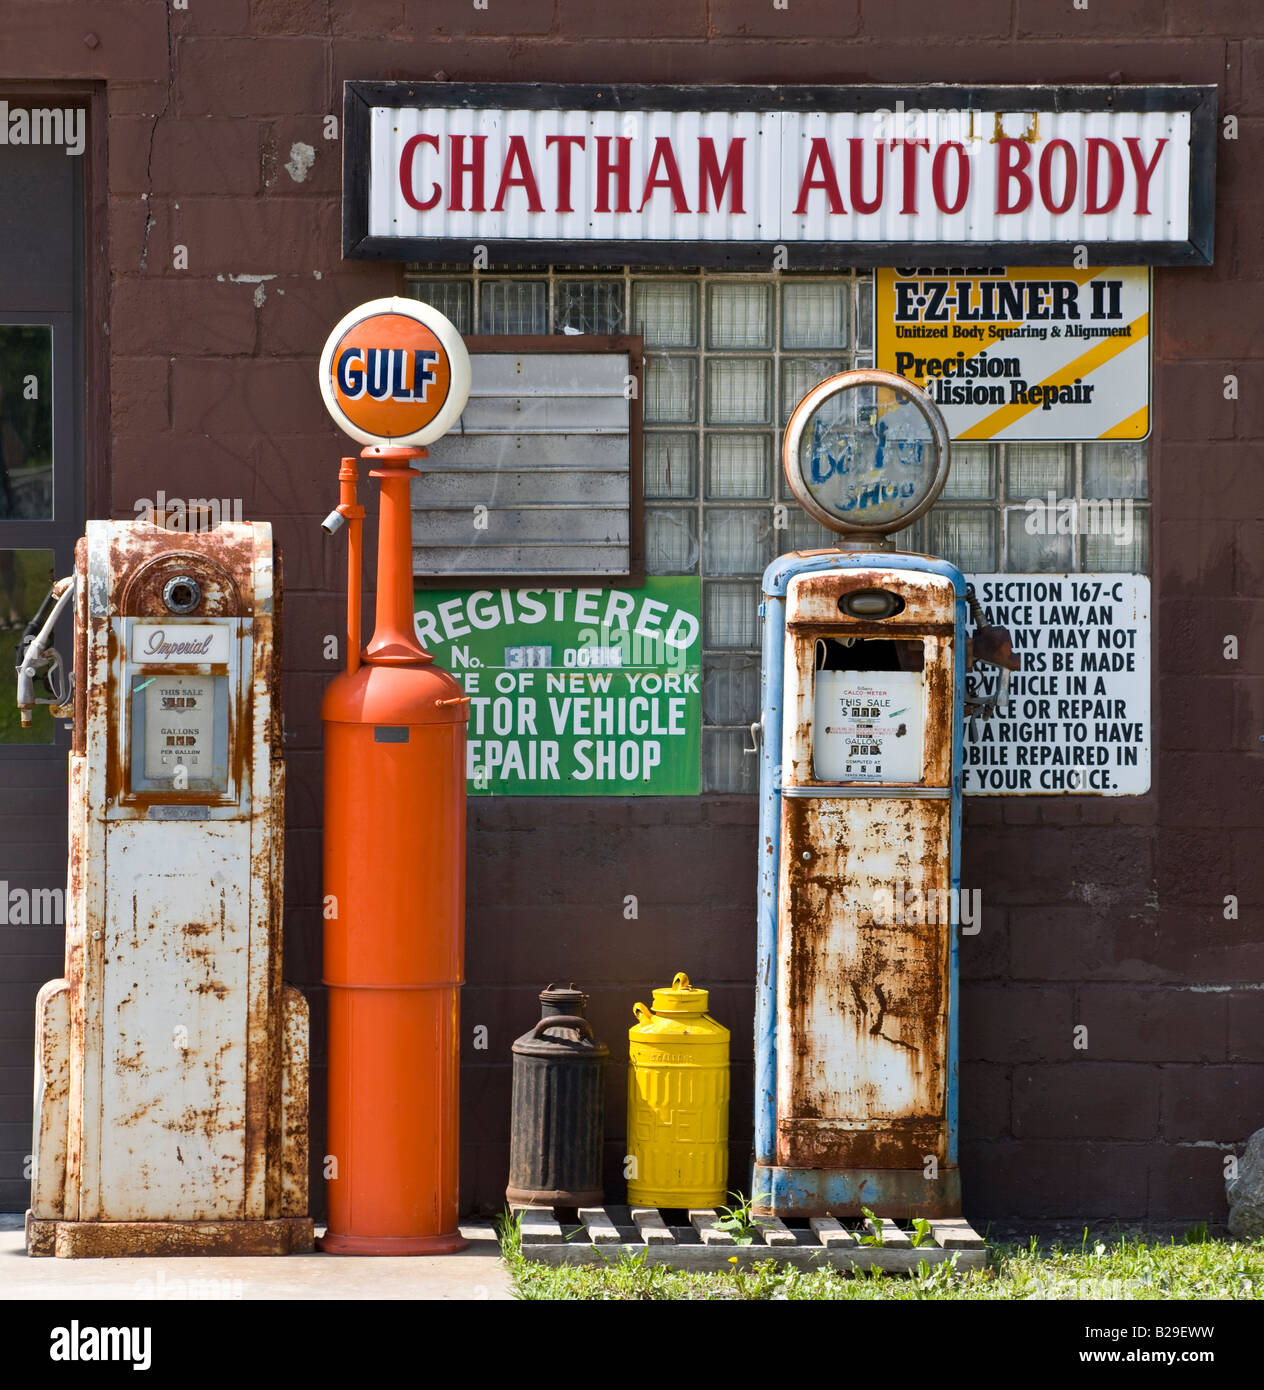 collection of old gas petrol pumps, Chatham auto body repair, Chatham, New York, USA Stock Photo